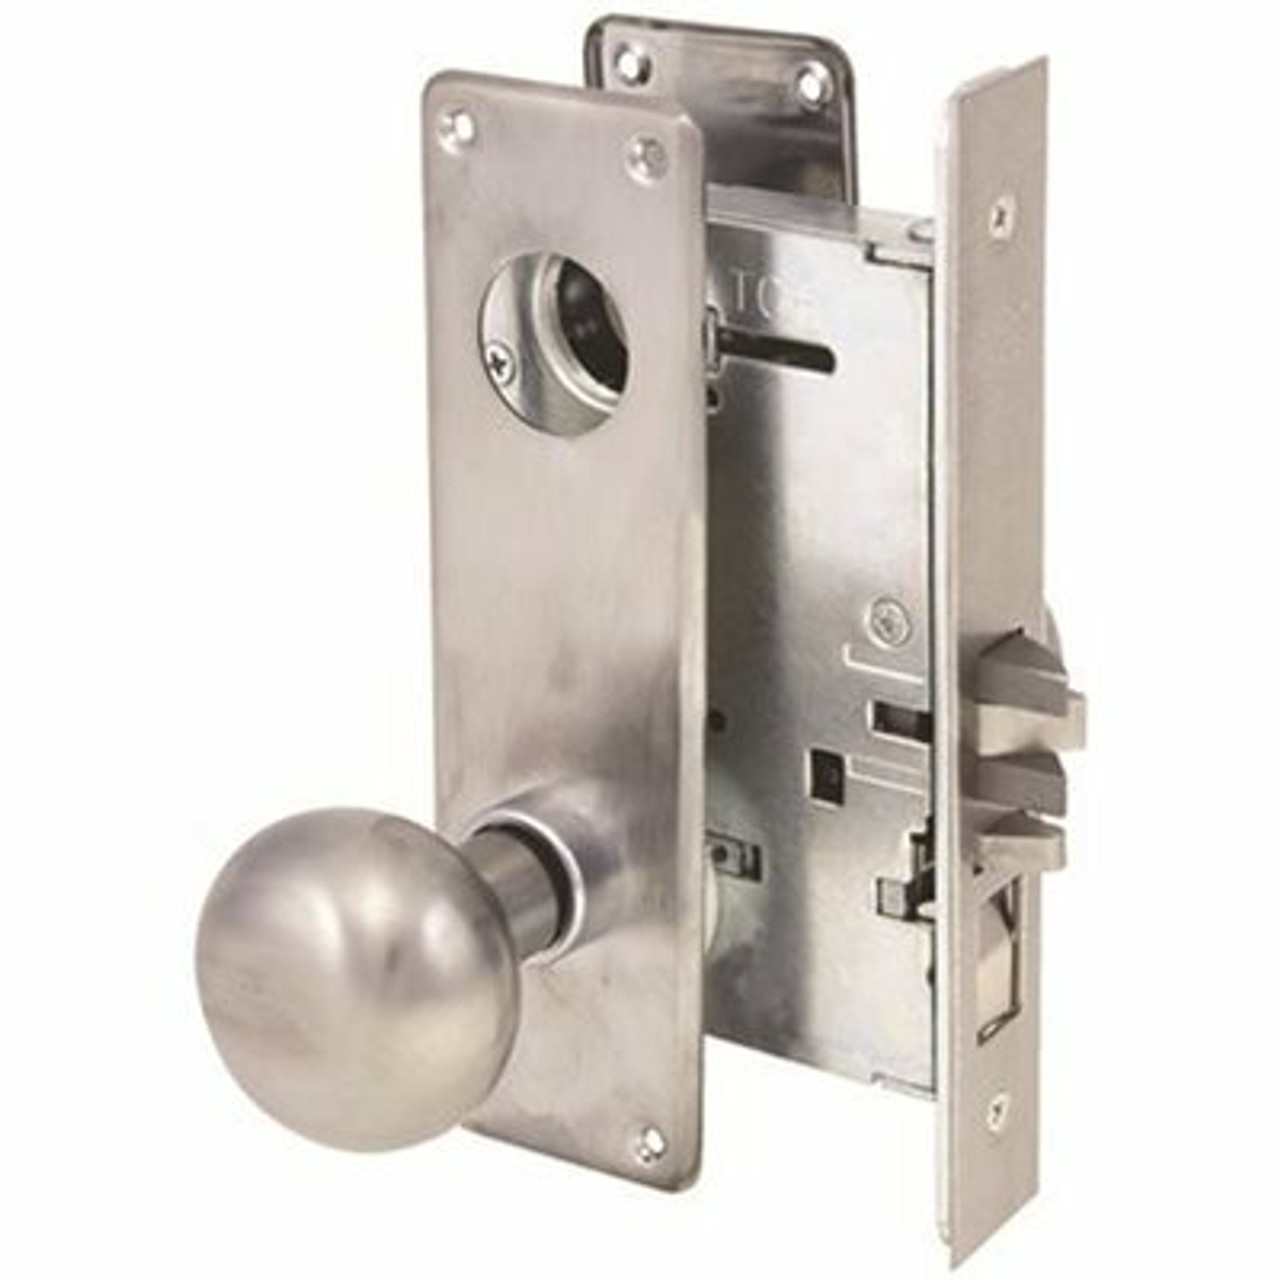 Arrow Lock Am Series 2-3/4 in. Office Mortise Lock Plymouth Knob Bs Dull Chrome